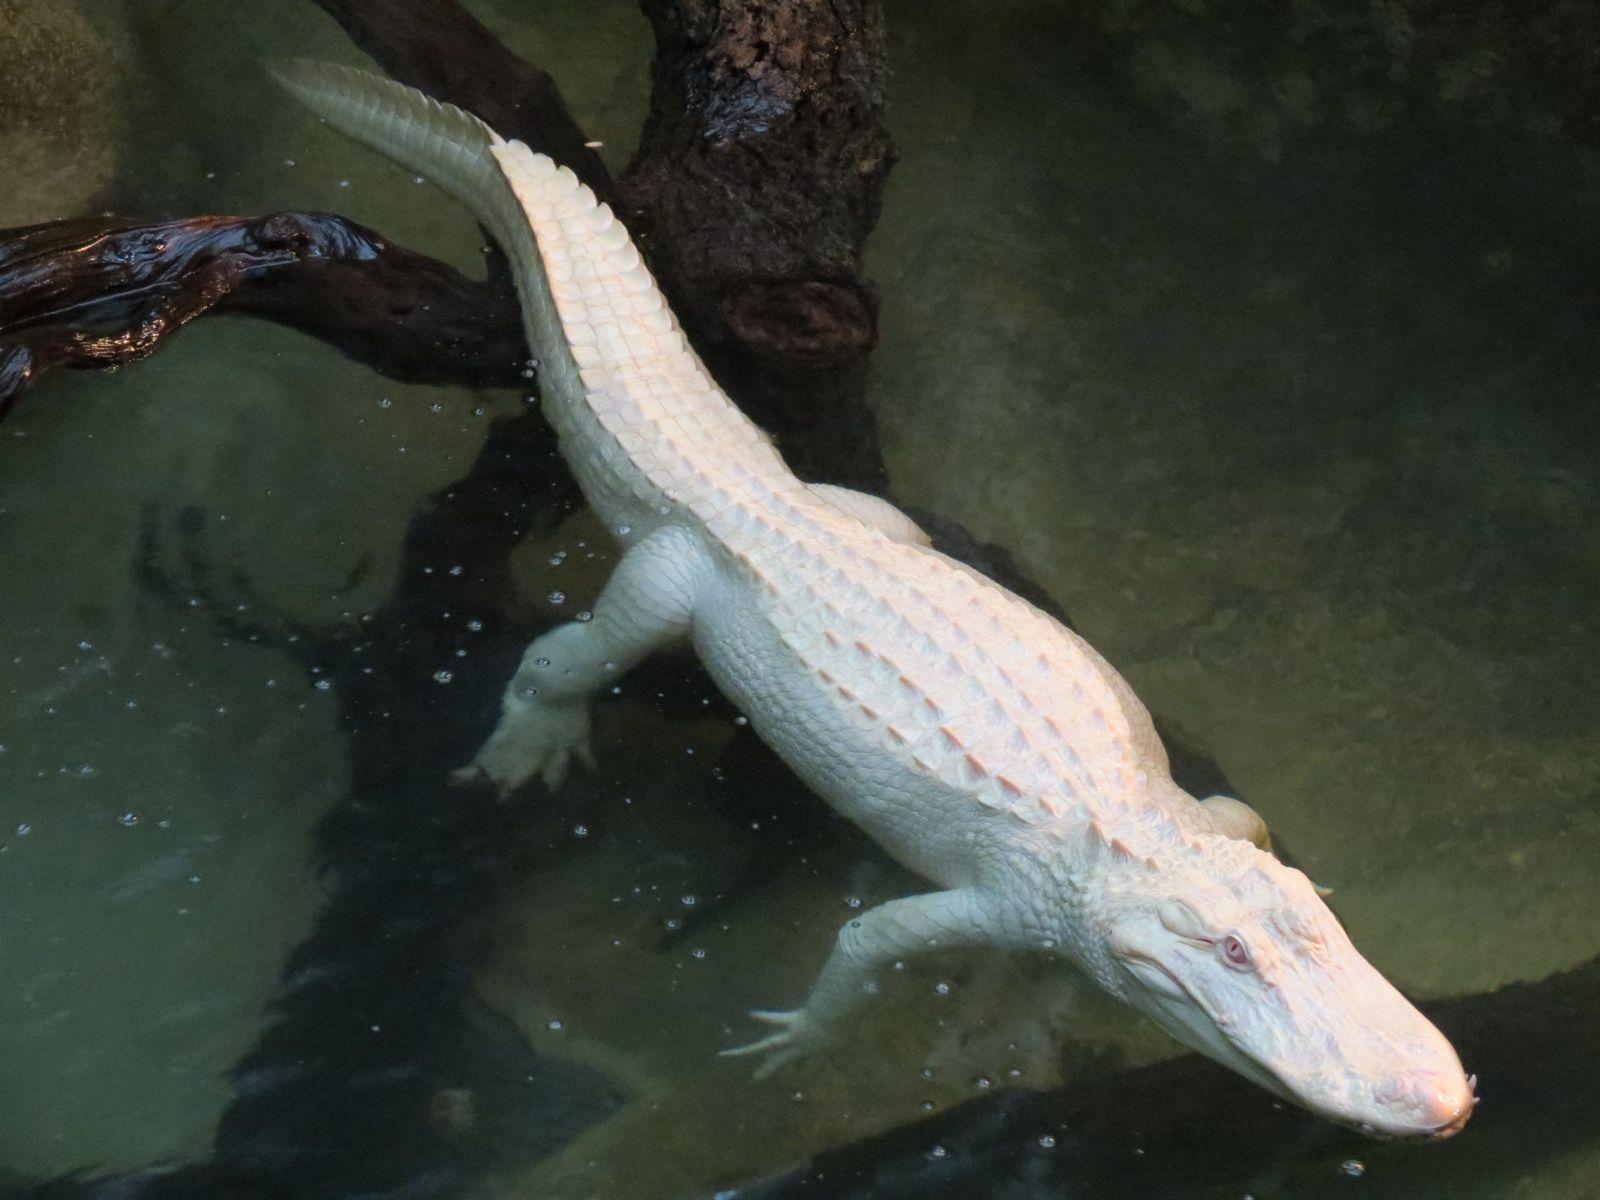 Reptiles and Amphibians of the Bayou Alligator